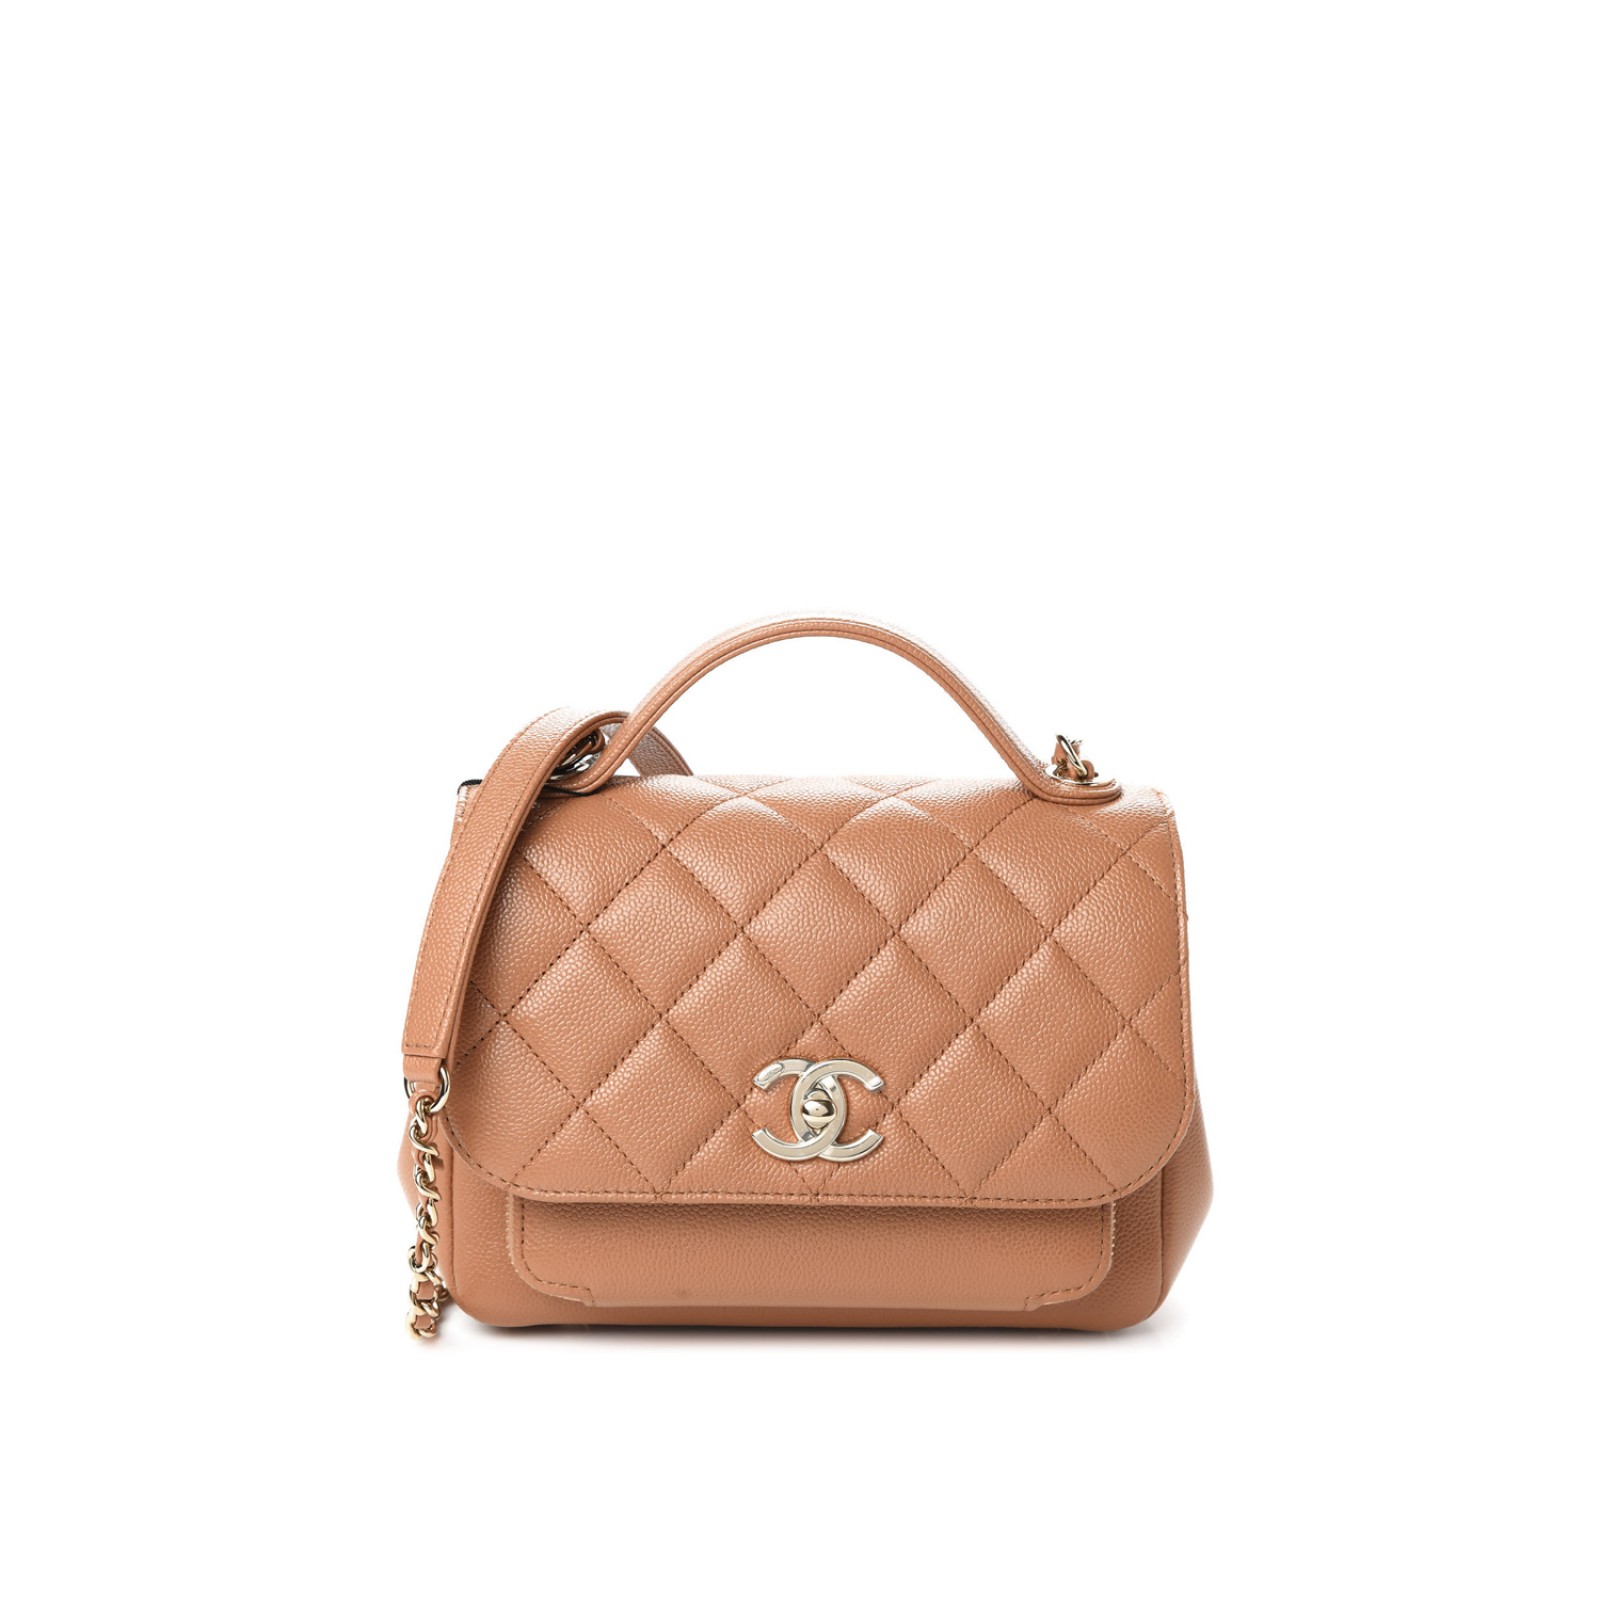 CHANEL SMALL BUSINESS AFFINITY FLAP BAG